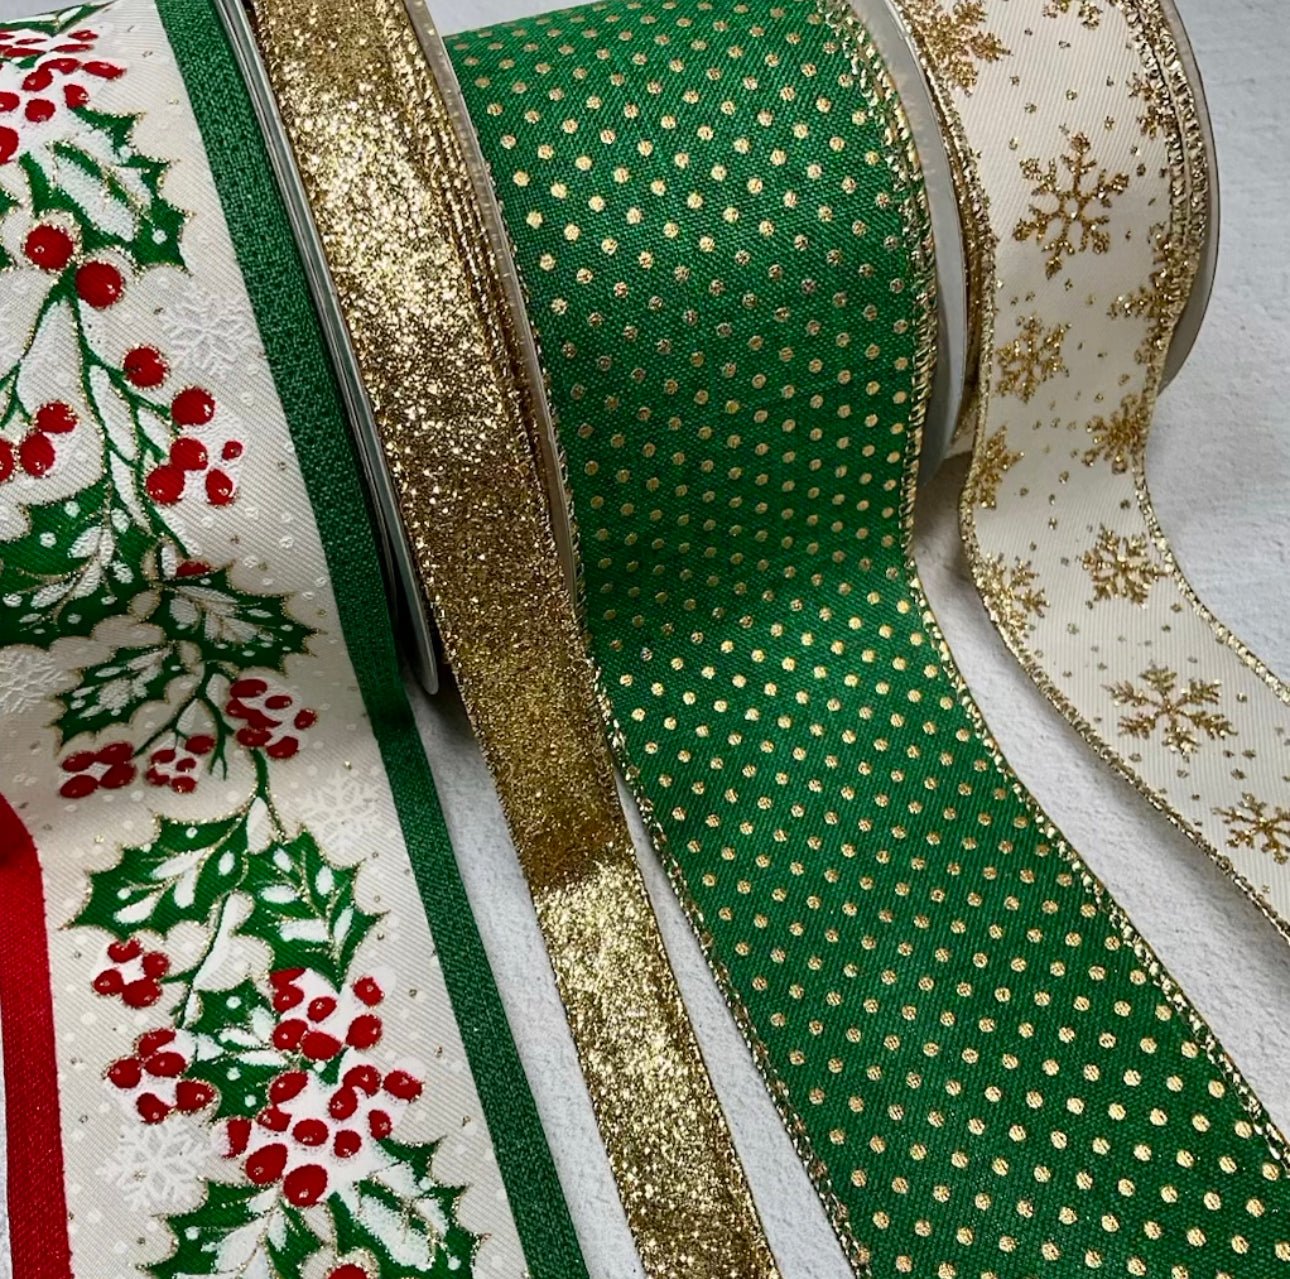 Holly and gold Christmas bow bundle - 4 rolls - Greenery MarketRibbons & Trimhollygoldx4